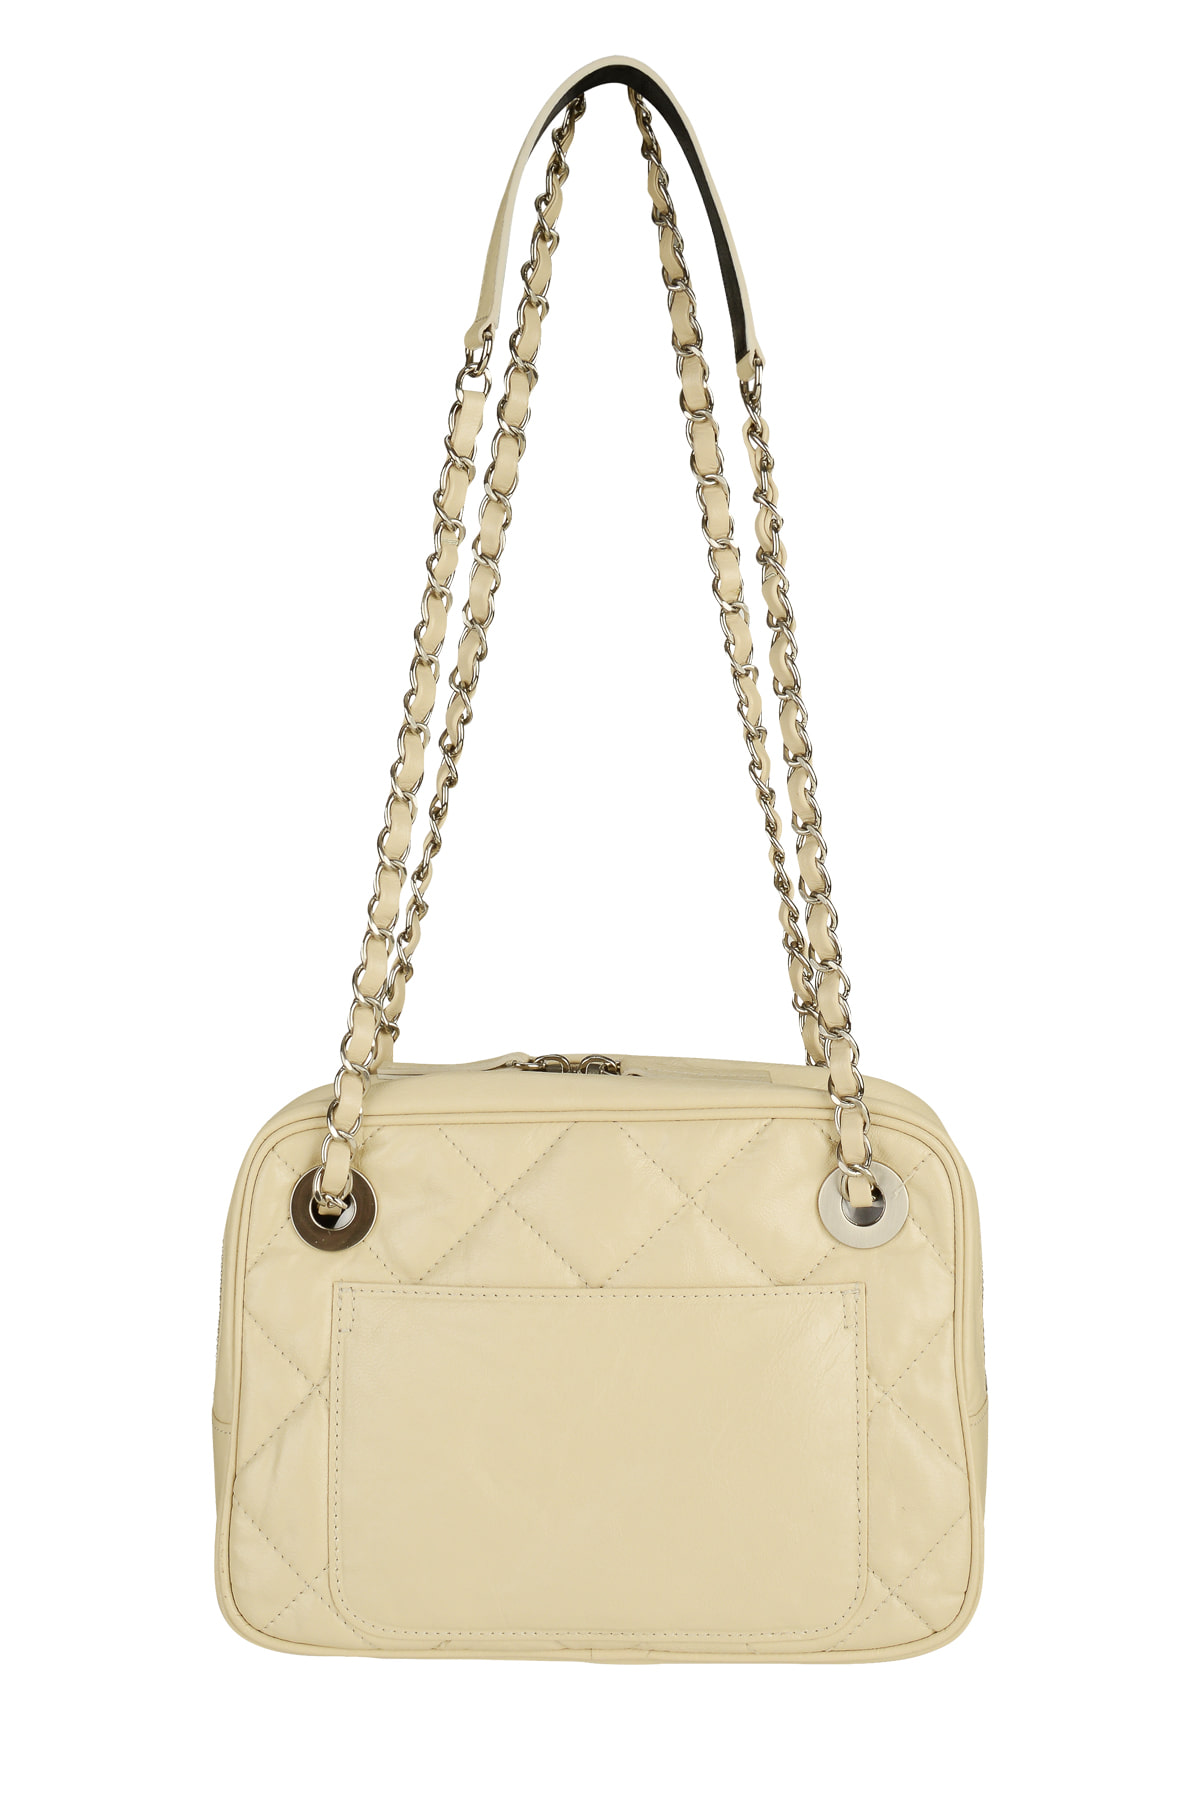 STUD MIDDLE QUILTING BAG IN IVORY